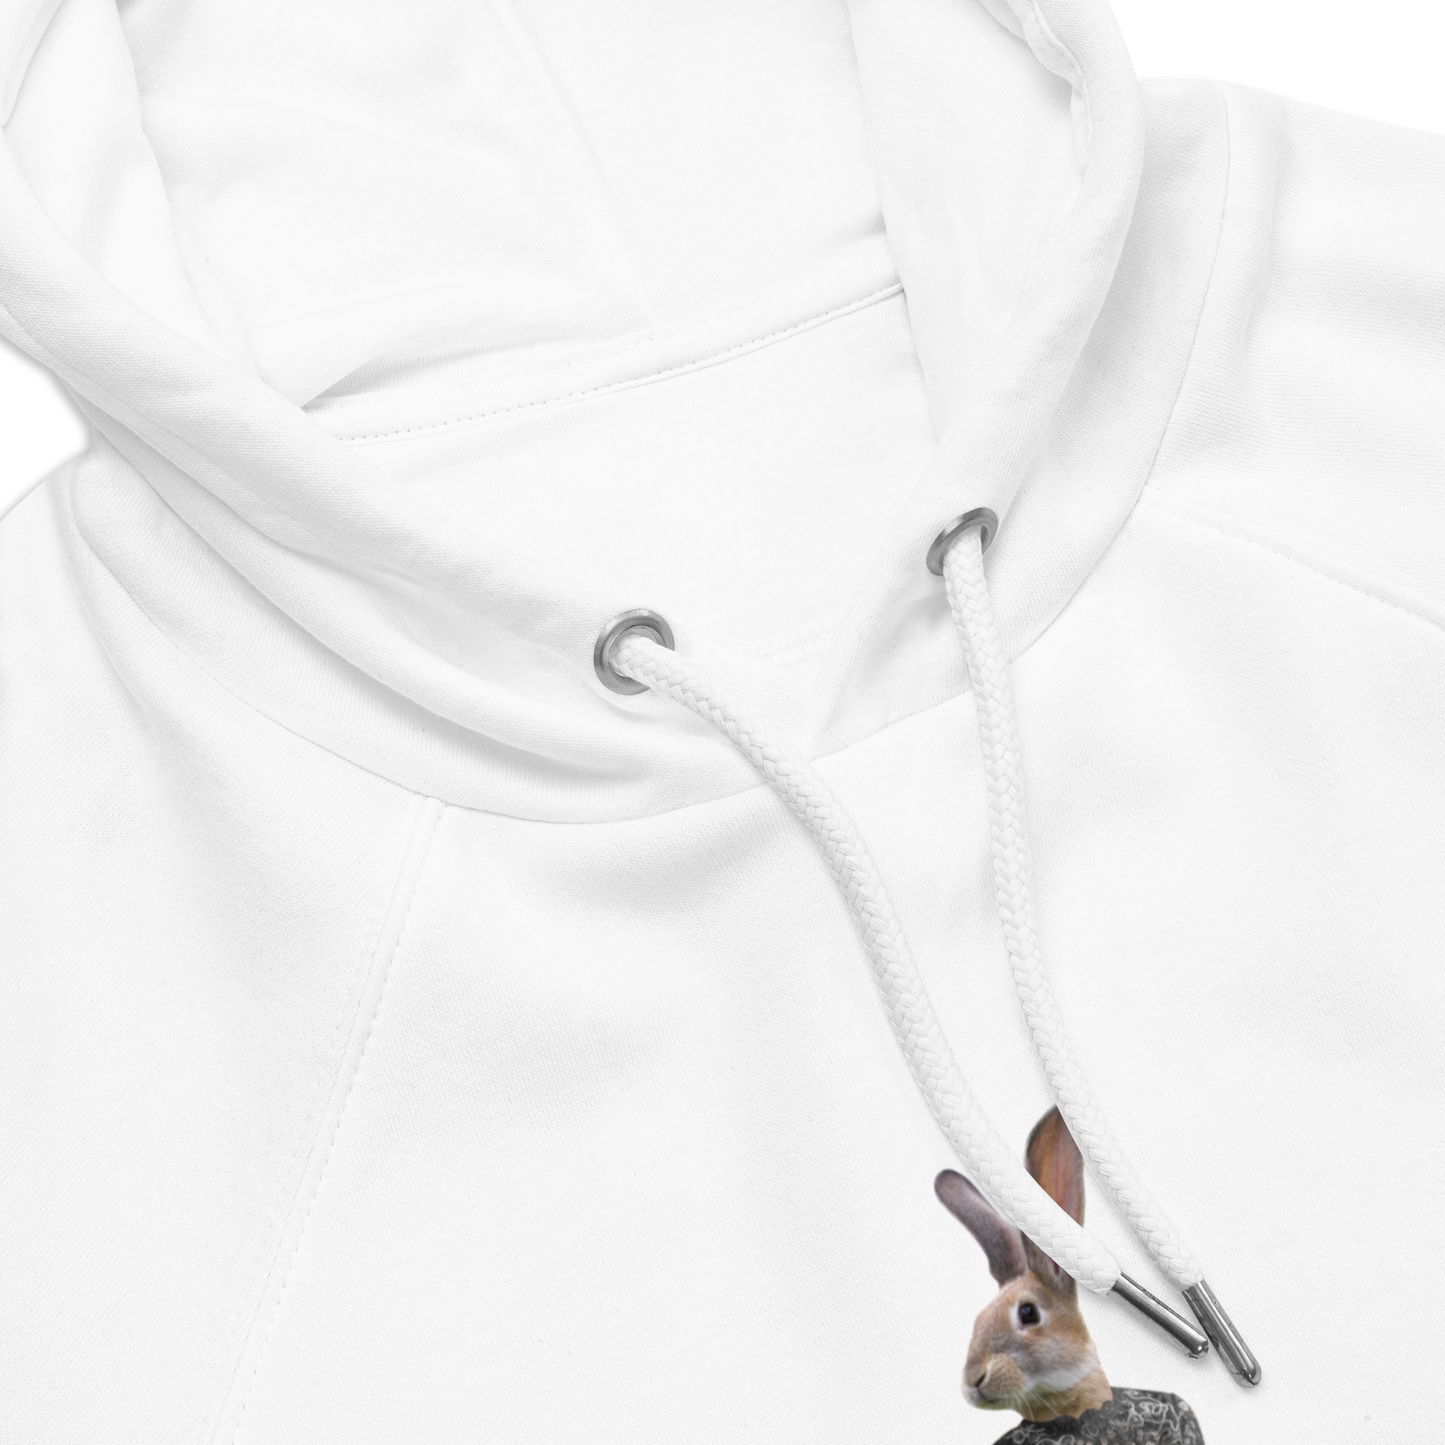 Product Details of a White Anthropomorphic Rabbit Raglan Hoodie featuring an irresistibly cute Anthropomorphic Rabbit graphic on the chest - Cute Graphic Rabbit Hoodies - Boozy Fox